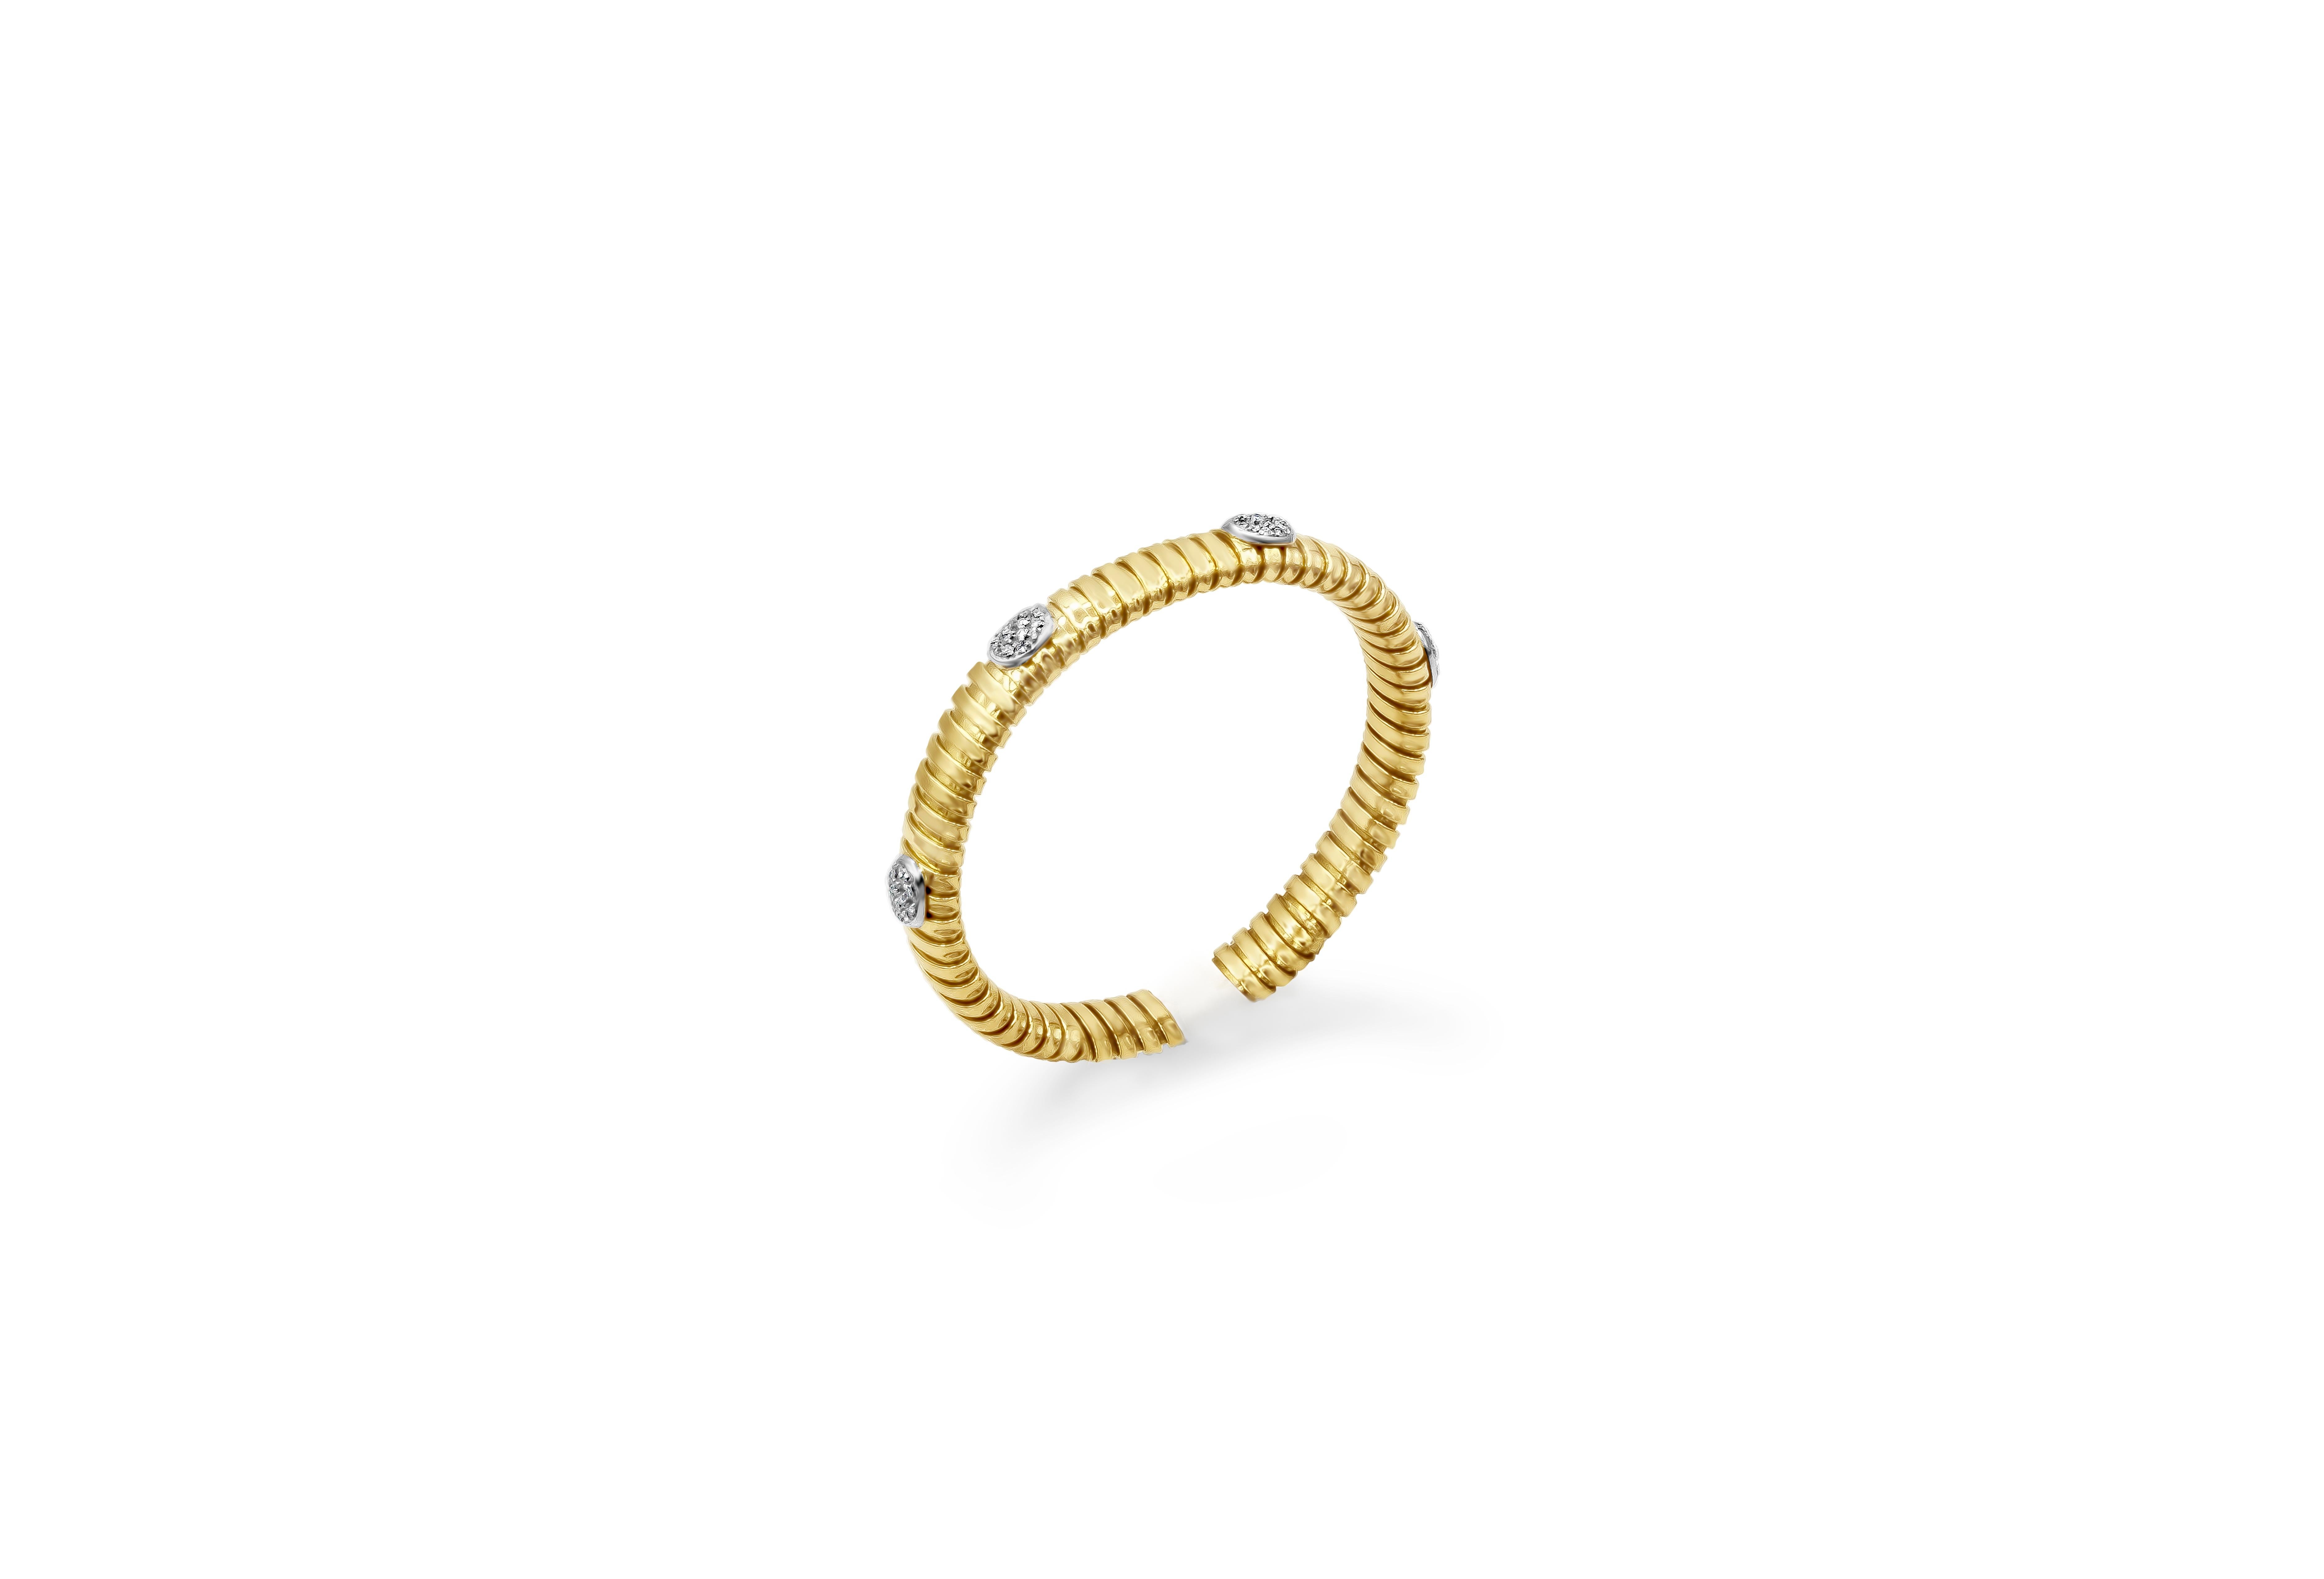 A fashionable and vibrant cuff bracelet in a chic spiral design made in 18k White Gold and Yellow Gold. Accented with micro-pave of 42 pieces of round brilliant diamonds weighing 0.37 carats total. Approximately 27.18 grams.

Style available in